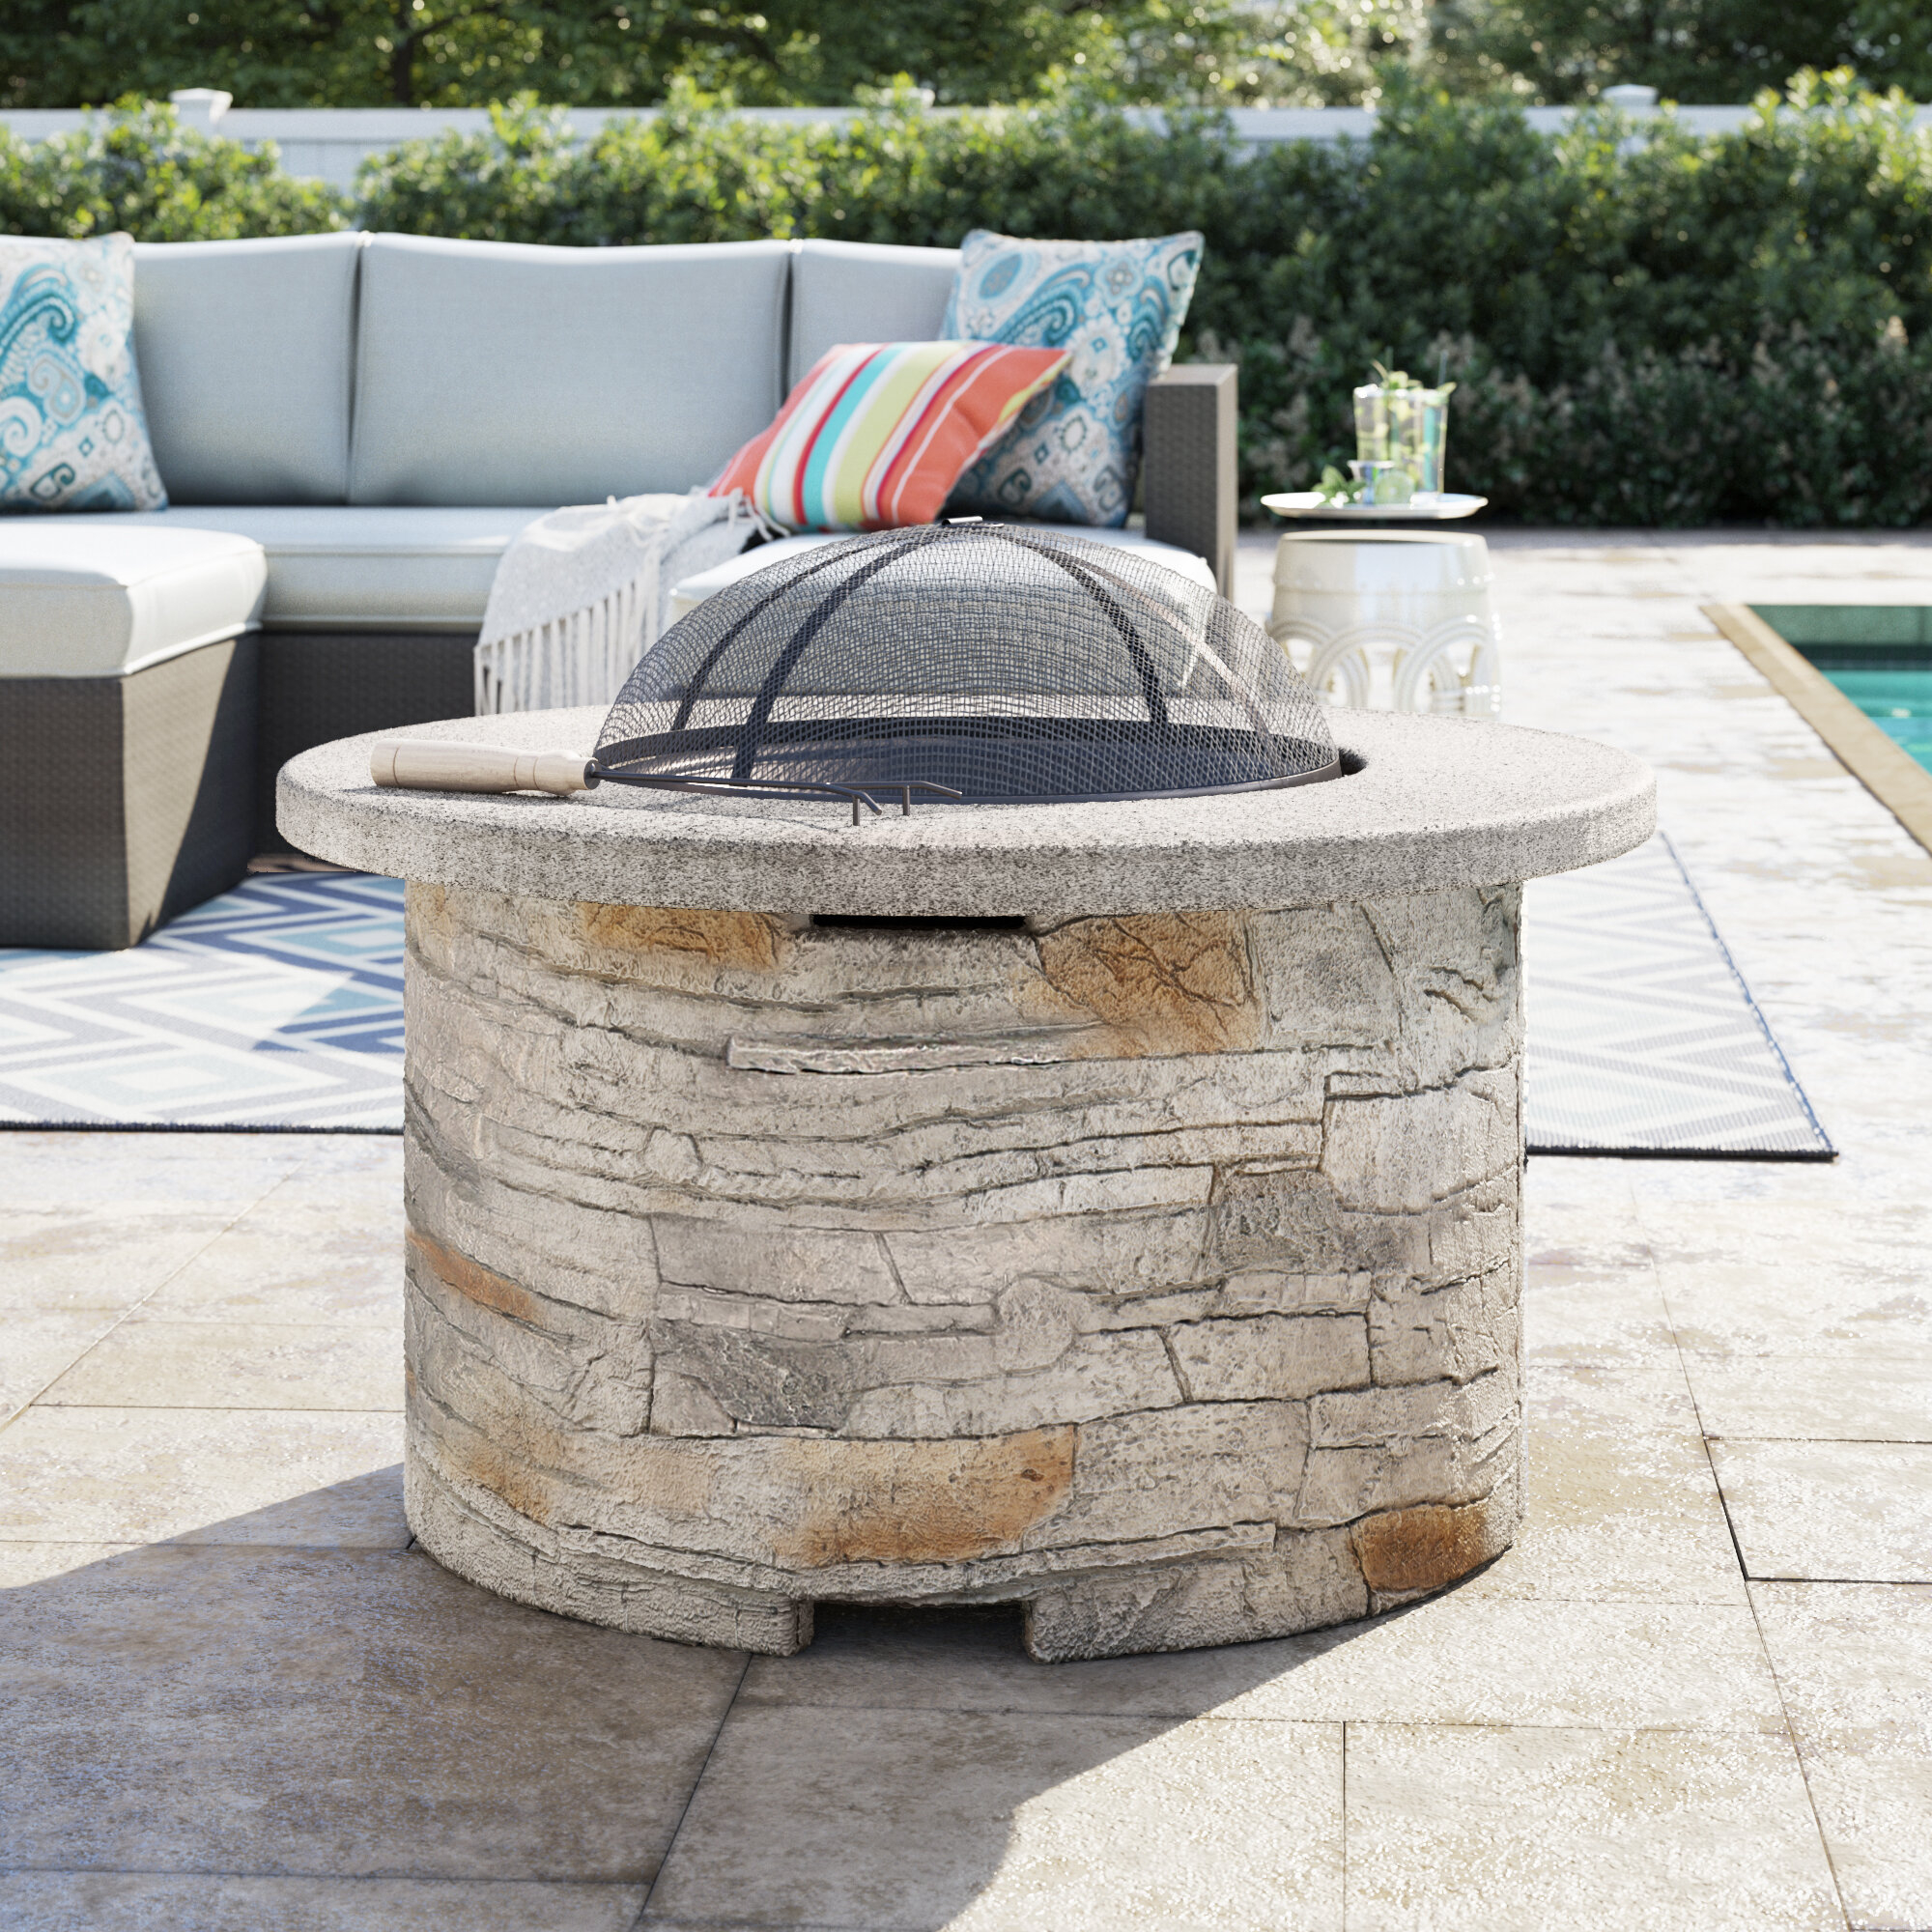 Wood Burning Fire Pit Table Visualhunt, Wood Burning Stone Fire Pit